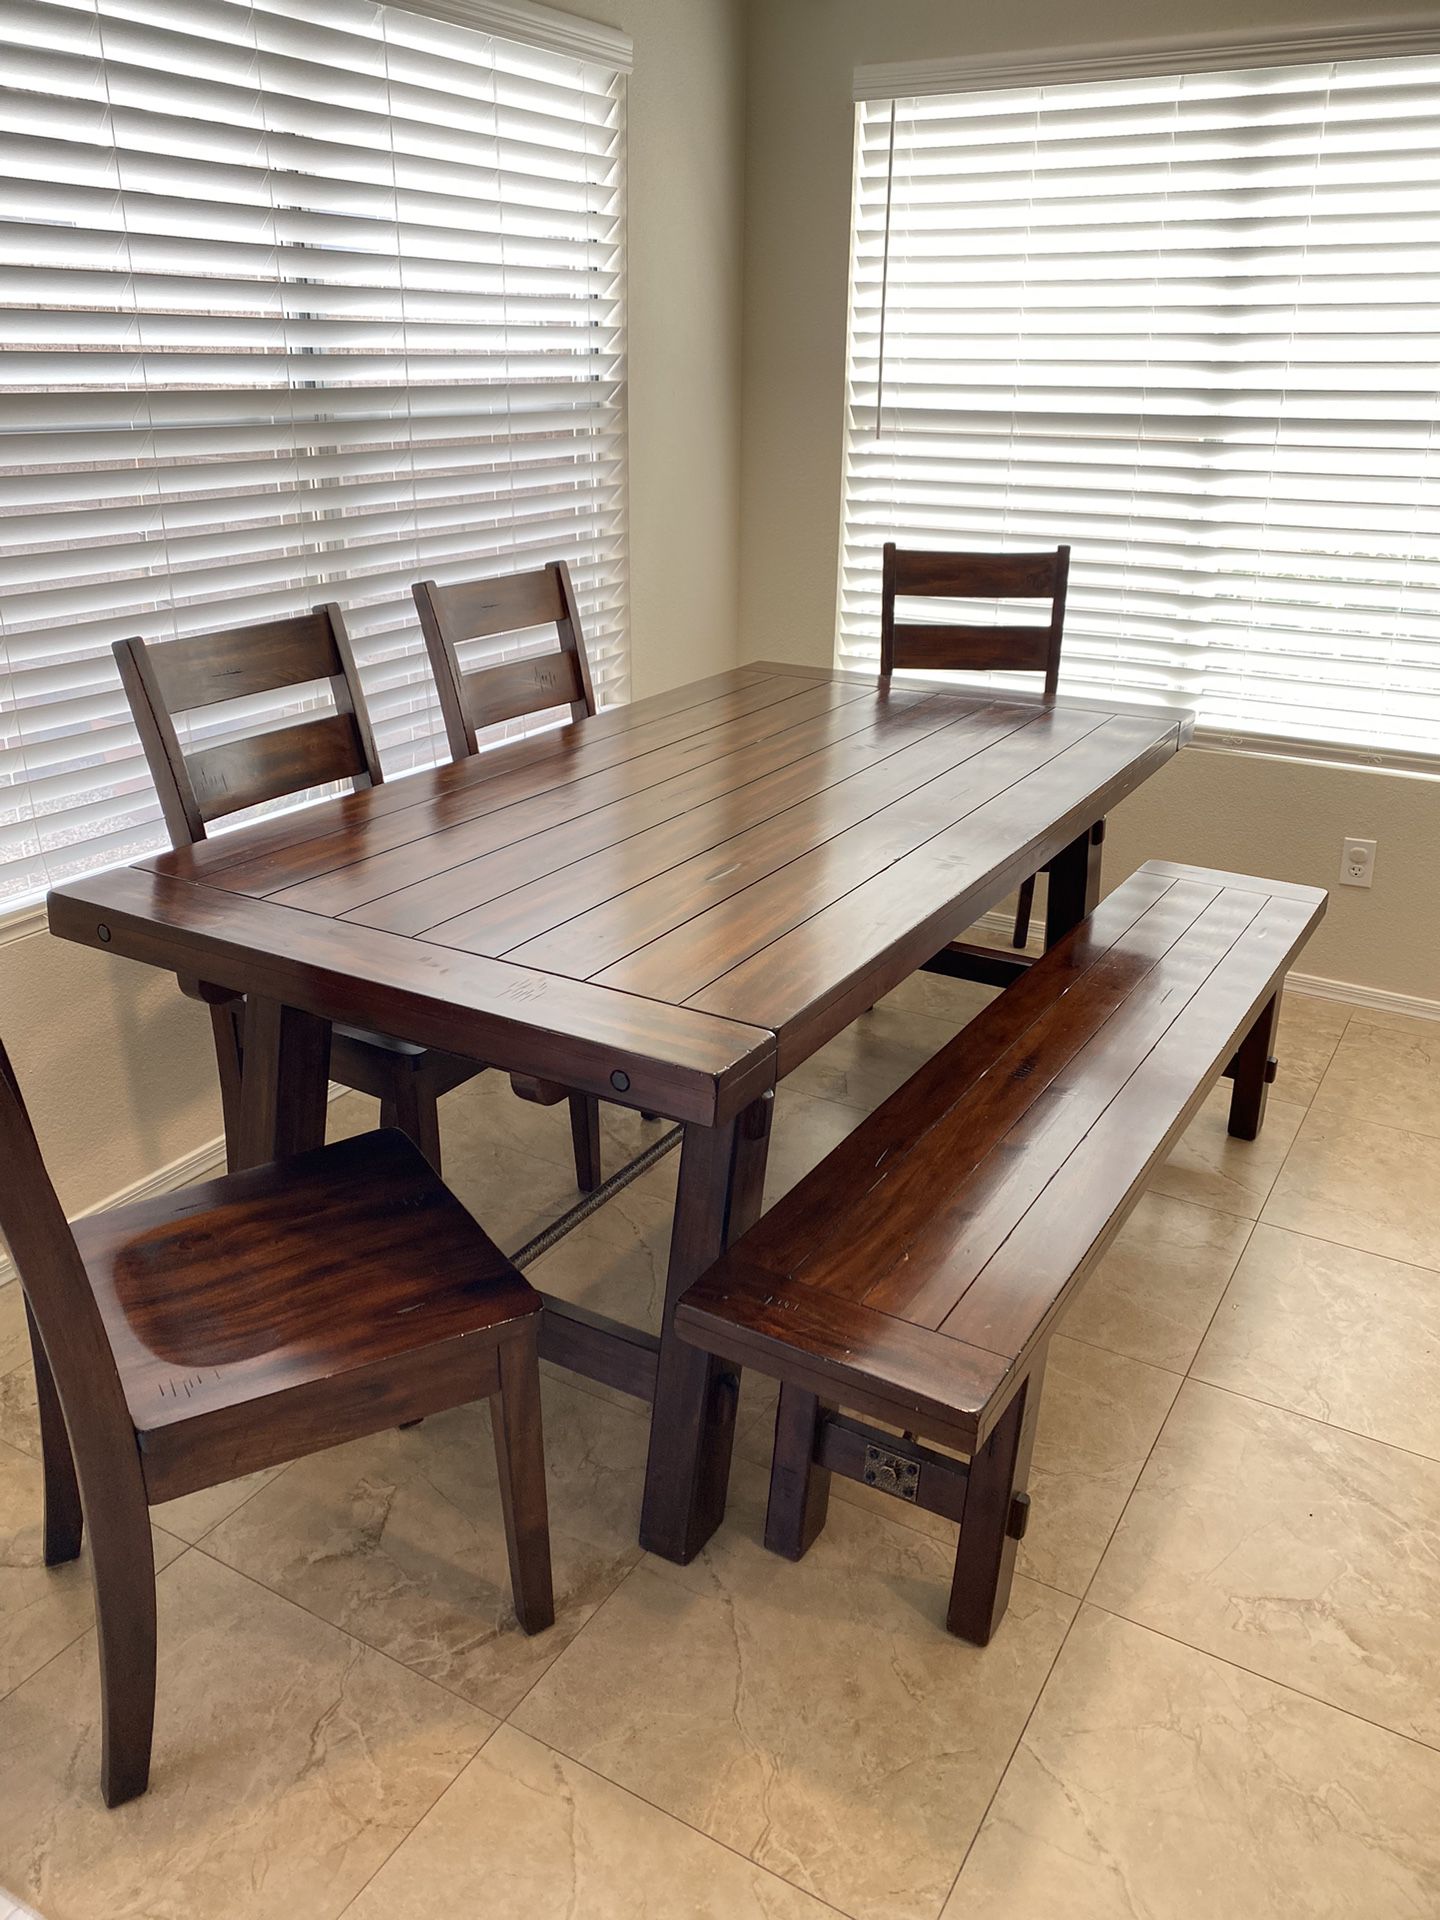 Sunny Designs Dining Set: Table, Chairs, Bench - $600